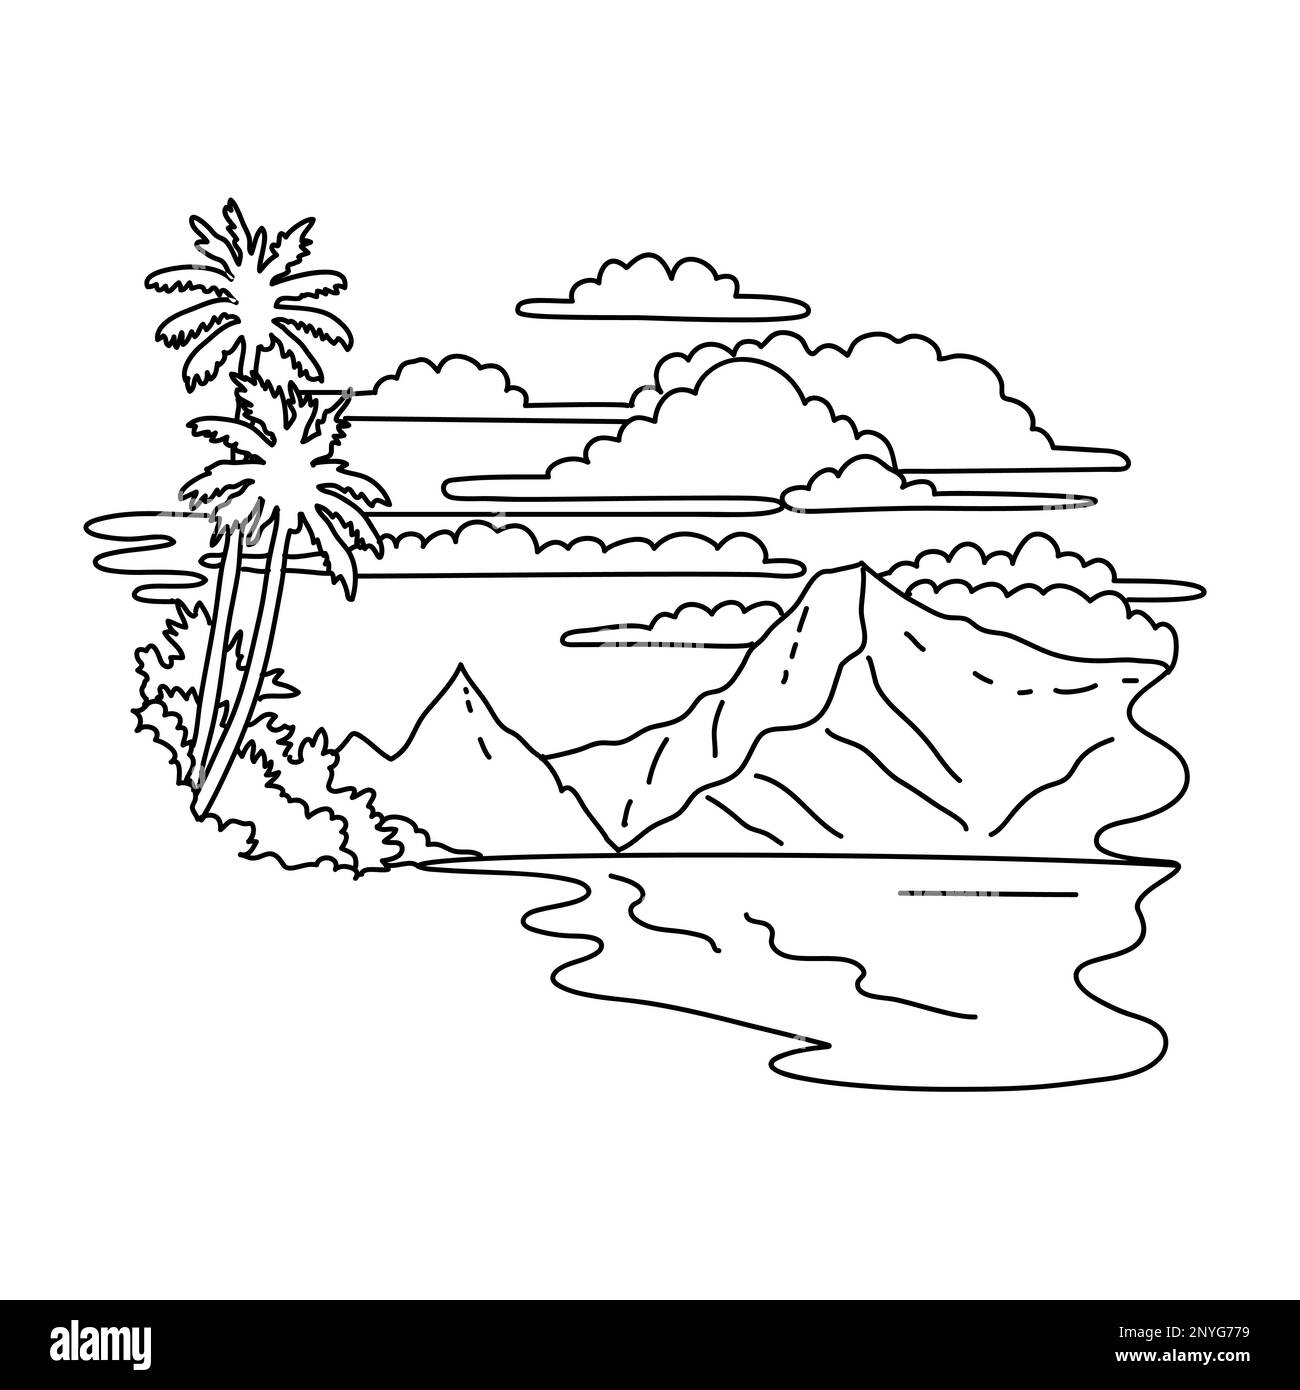 Mono line illustration of Ofu Beach on Ofu Island in the Manu'a Islands within the National Park of American Samoa monoline line drawing art style. Stock Photo